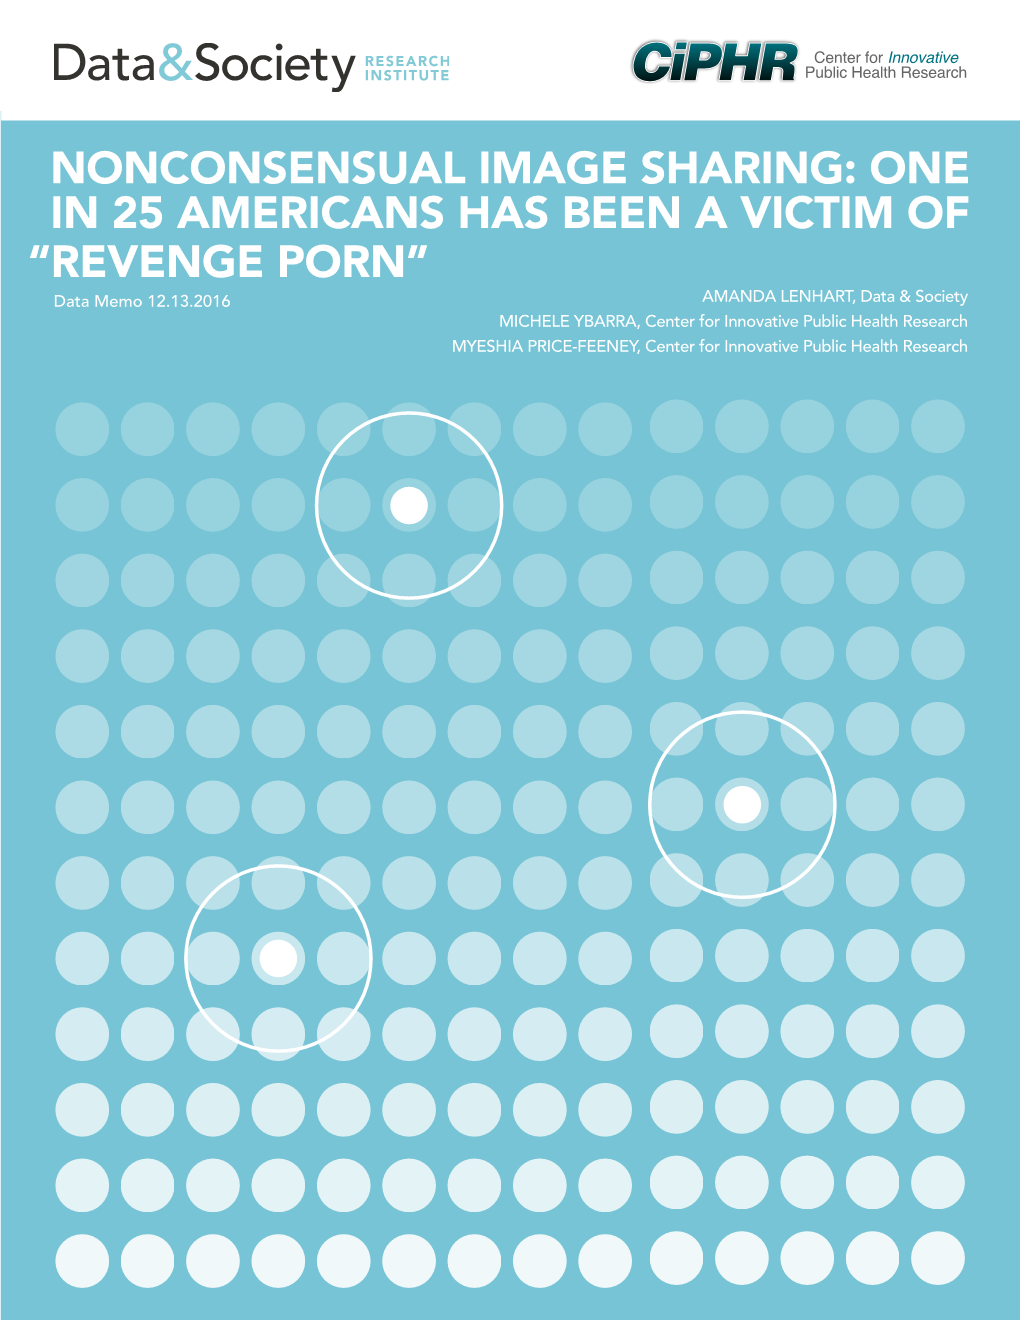 Nonconsensual Image Sharing: One in 25 Americans Has Been a Victim Of